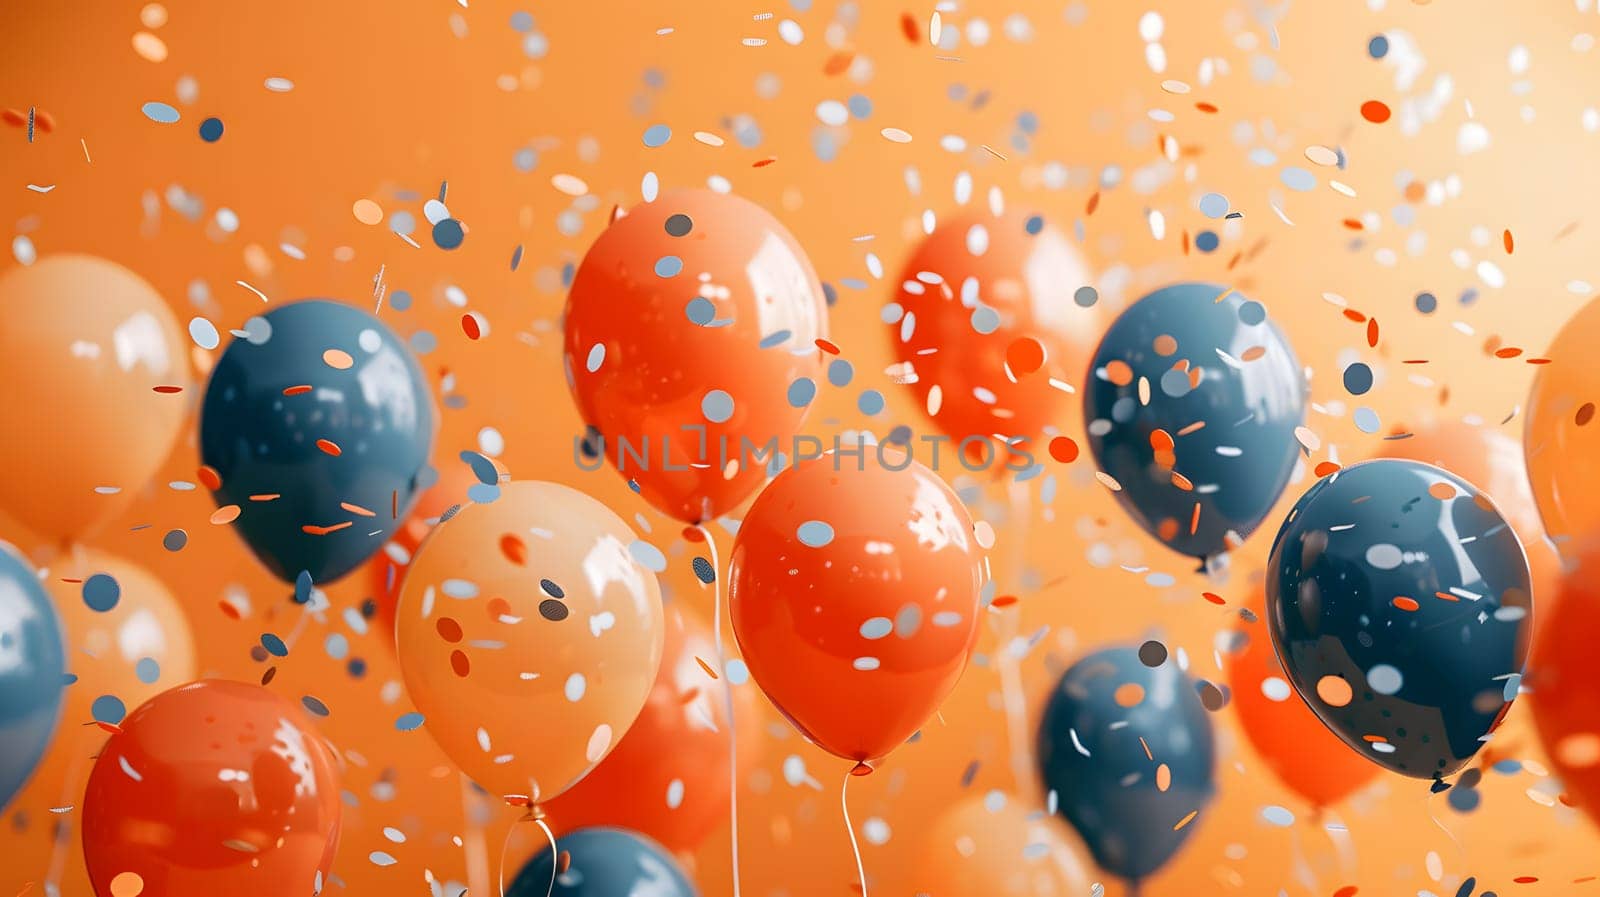 Electric blue liquid bubbles float underwater against an orange background by Nadtochiy